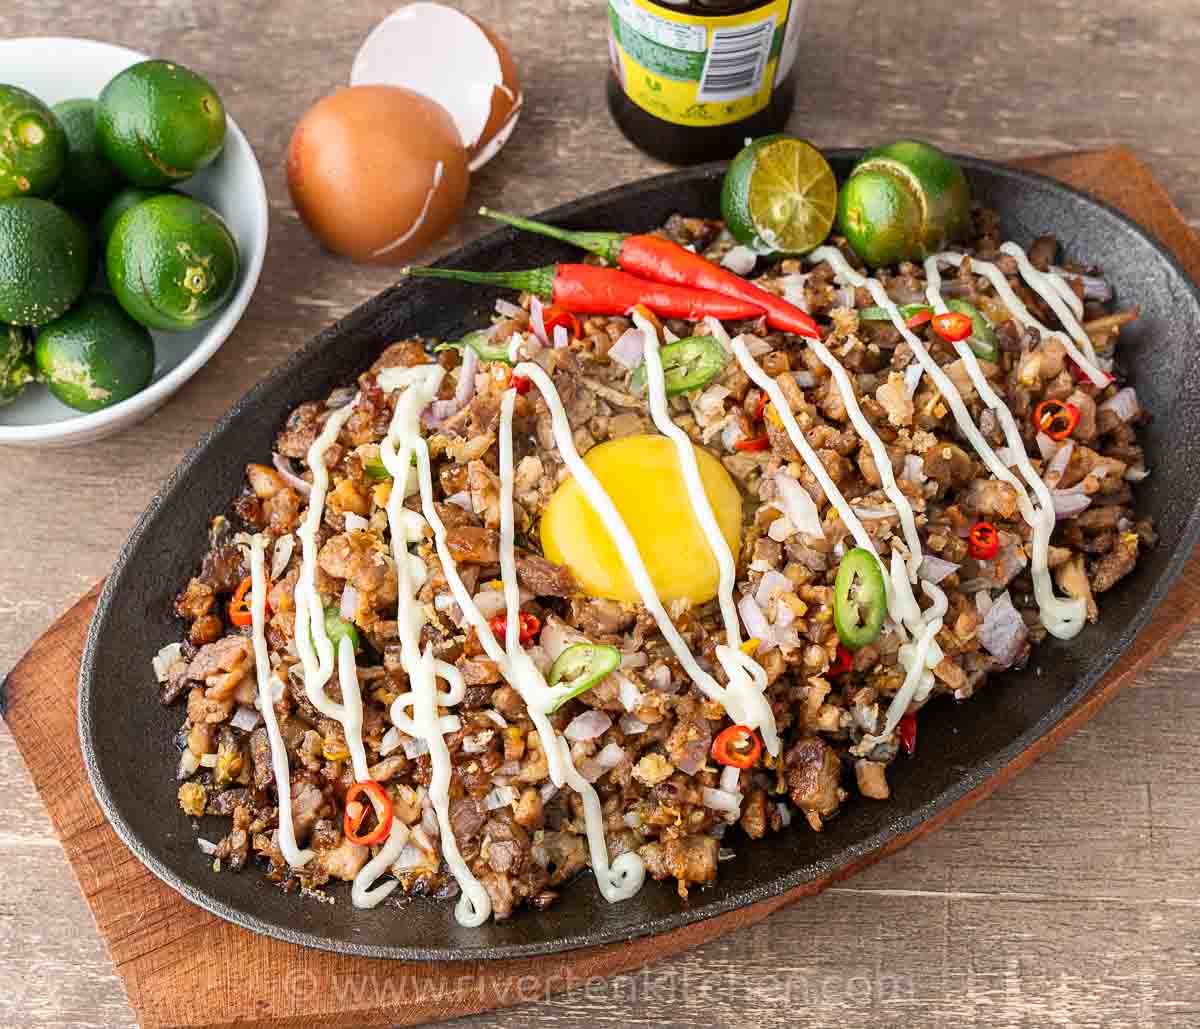 Filipino pork dish called sisig made of pork belly, onions, chilies served on a sizzling plate drizzled with mayonnaise.